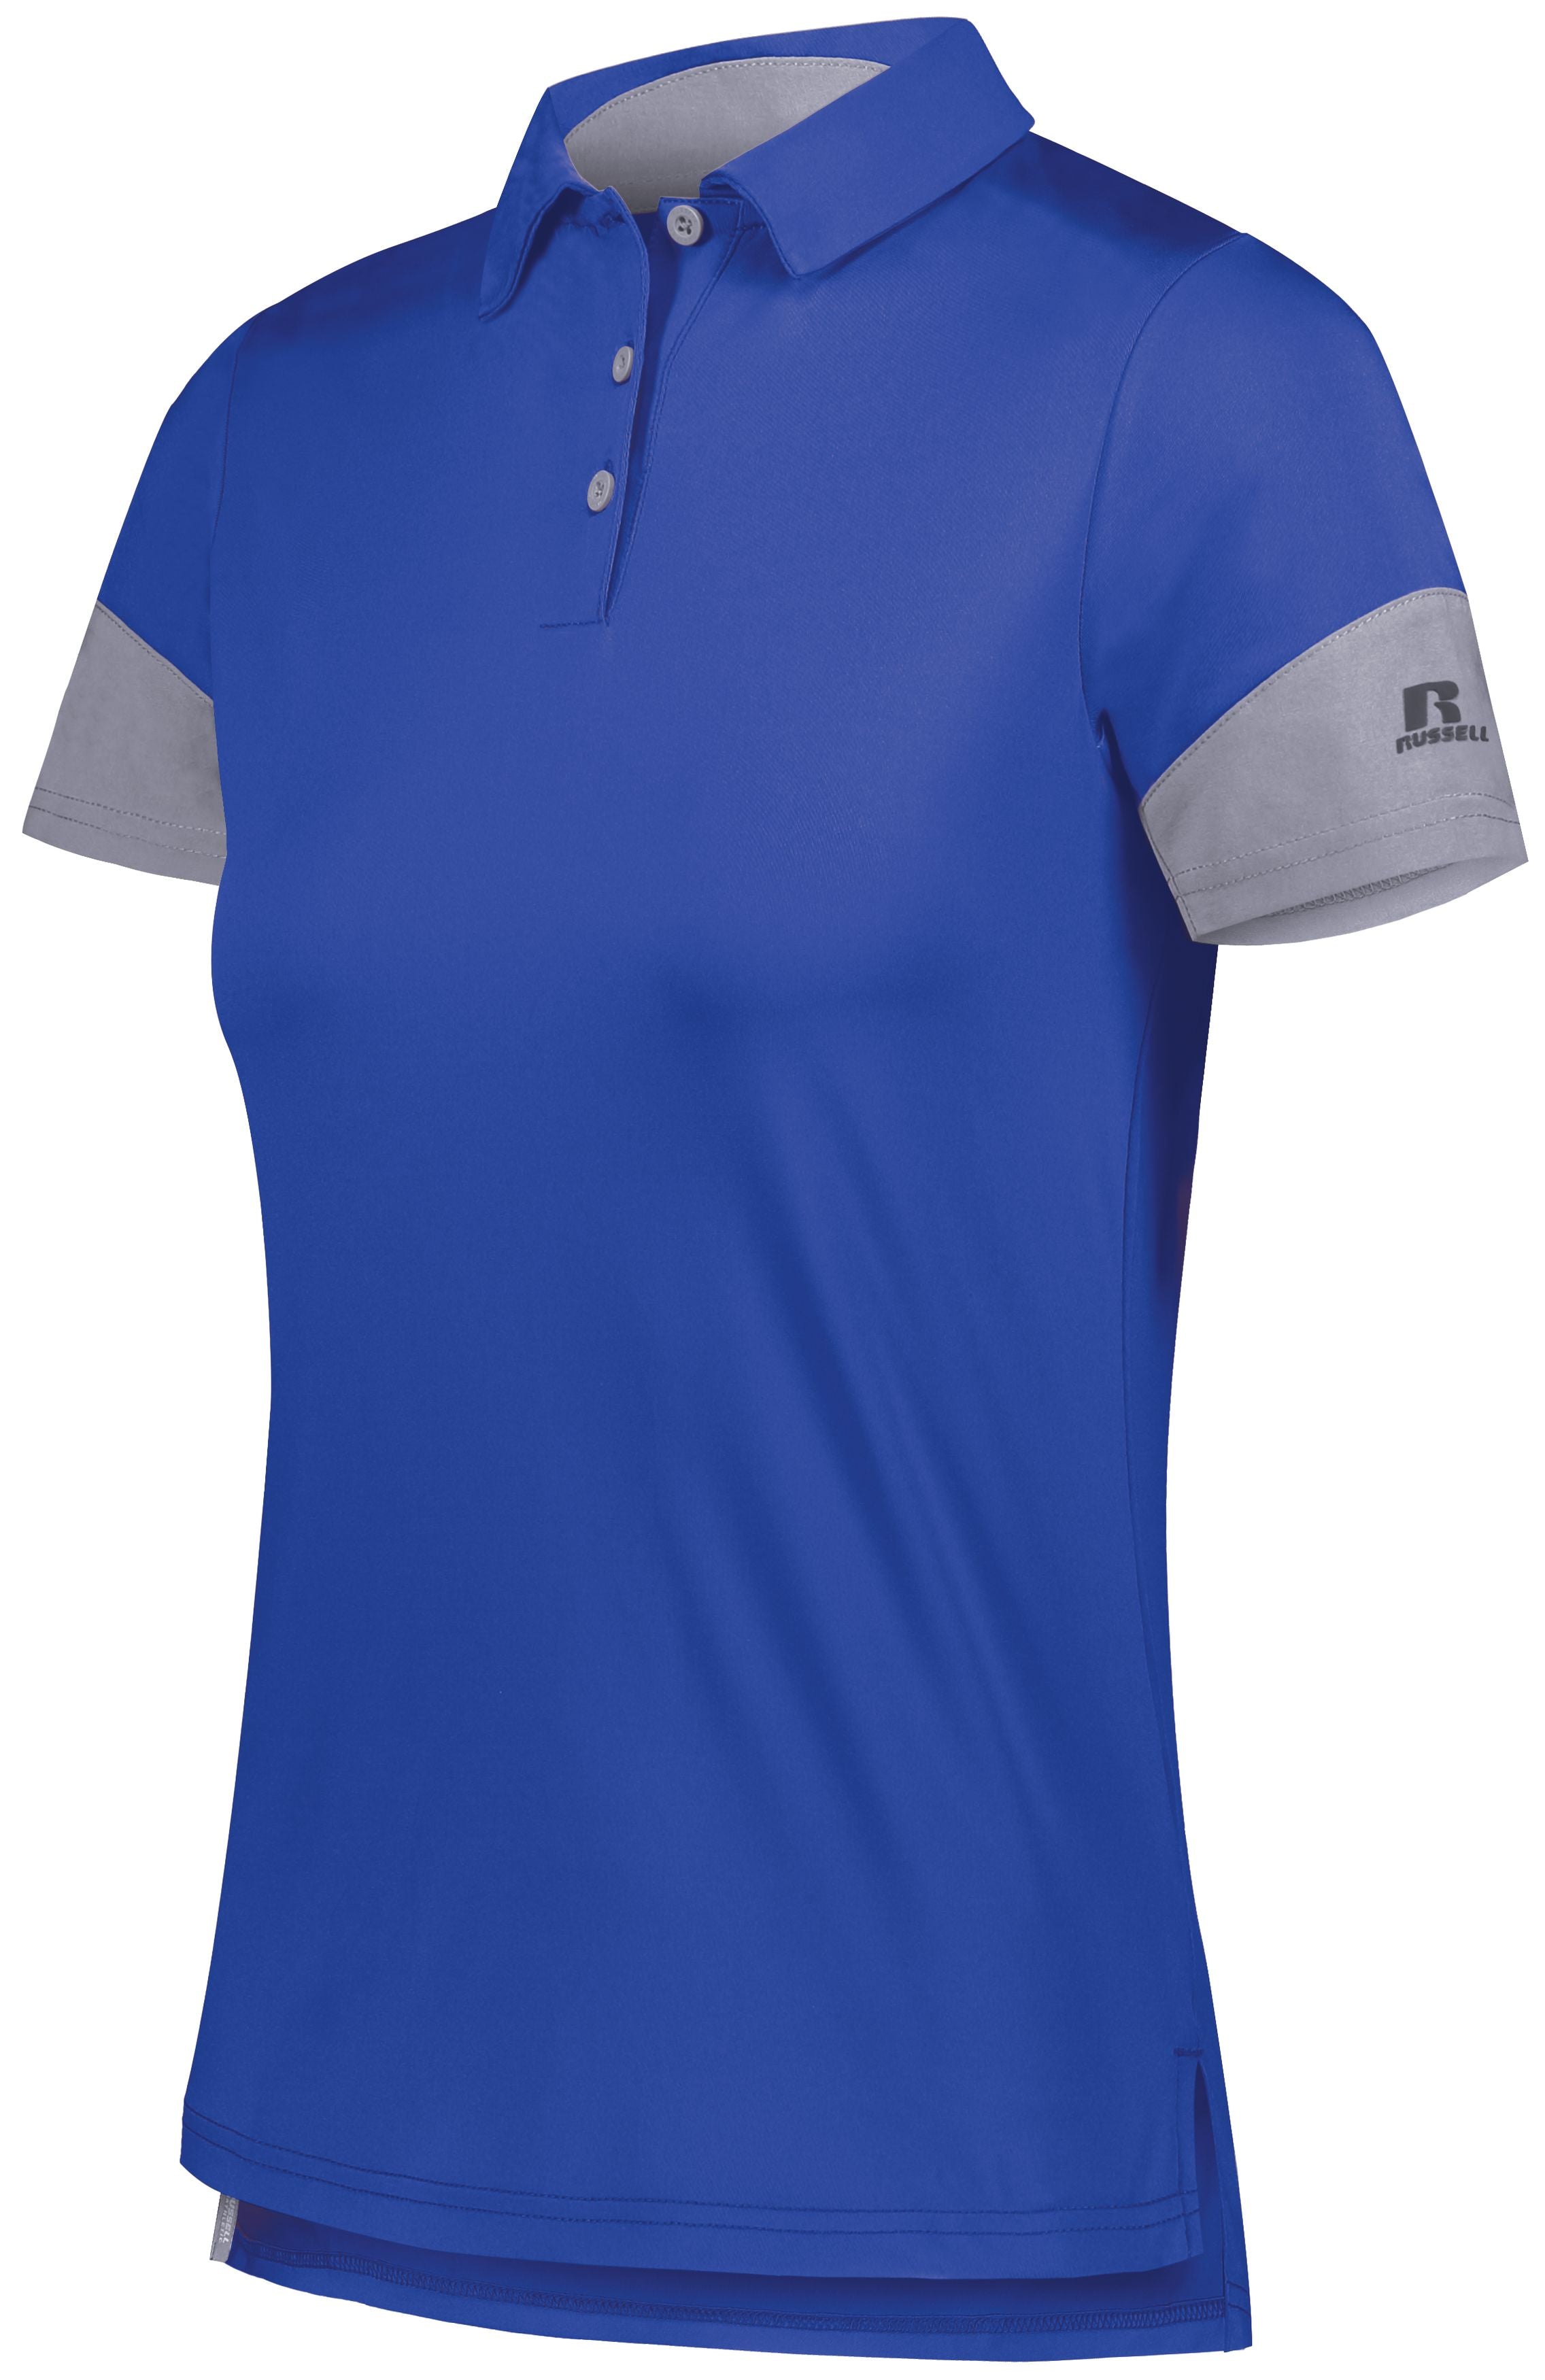 Russell Athletic Ladies Hybrid Polo in Royal/Steel  -Part of the Ladies, Ladies-Polo, Polos, Russell-Athletic-Products, Shirts product lines at KanaleyCreations.com